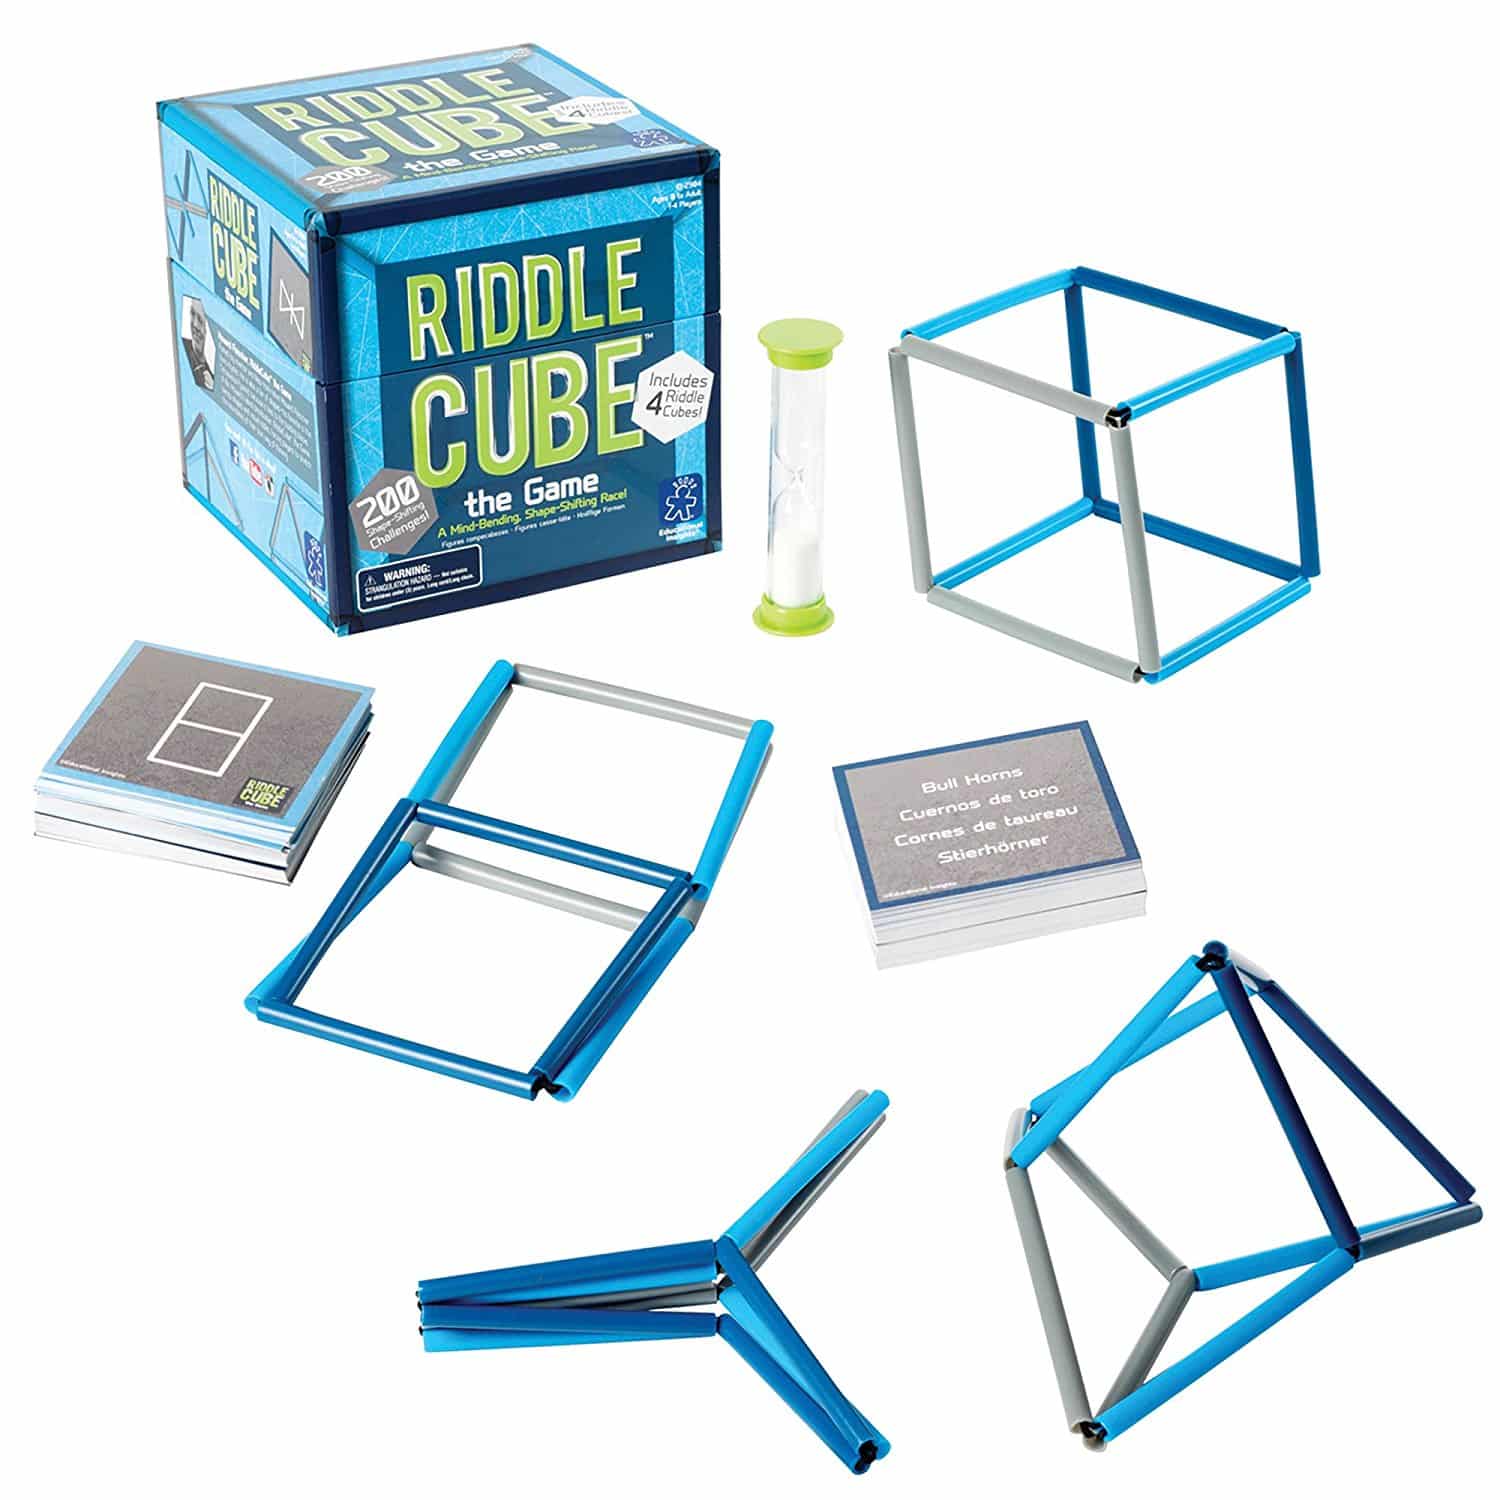 DEAL ALERT: Seriously Love this game – RiddleCube the Game 45% off!!